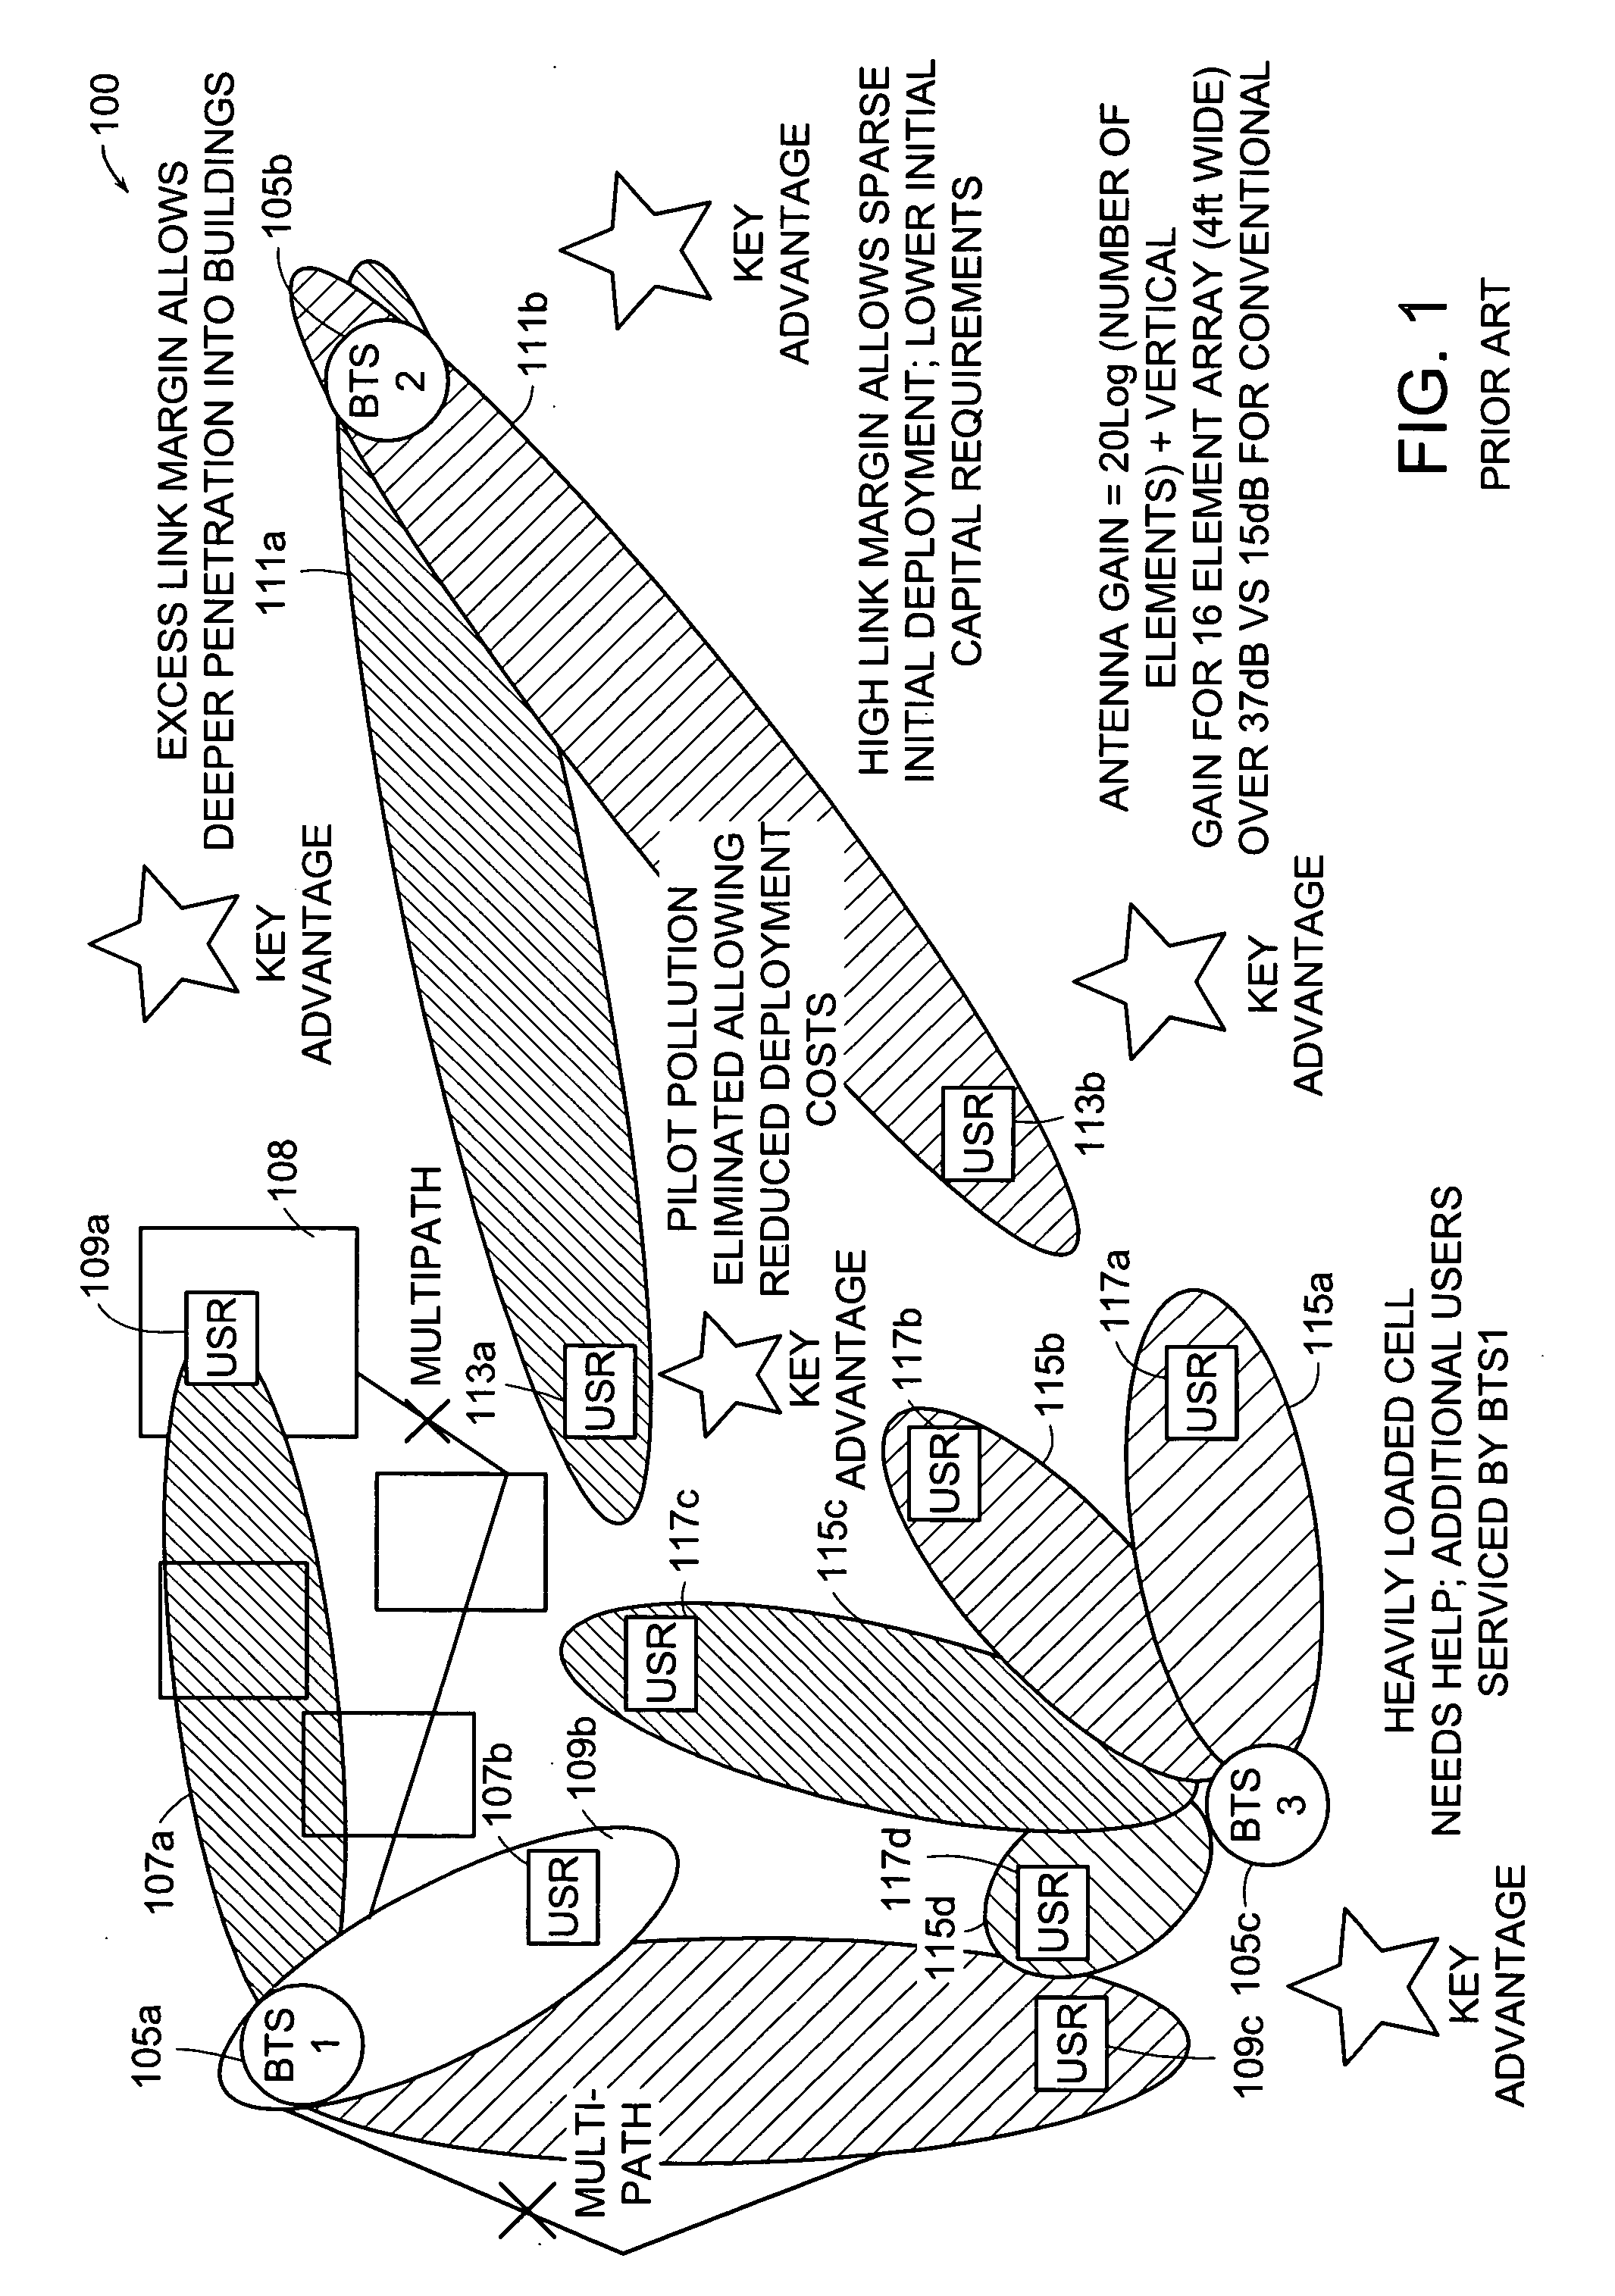 Method and system for economical beam forming in a radio communication system